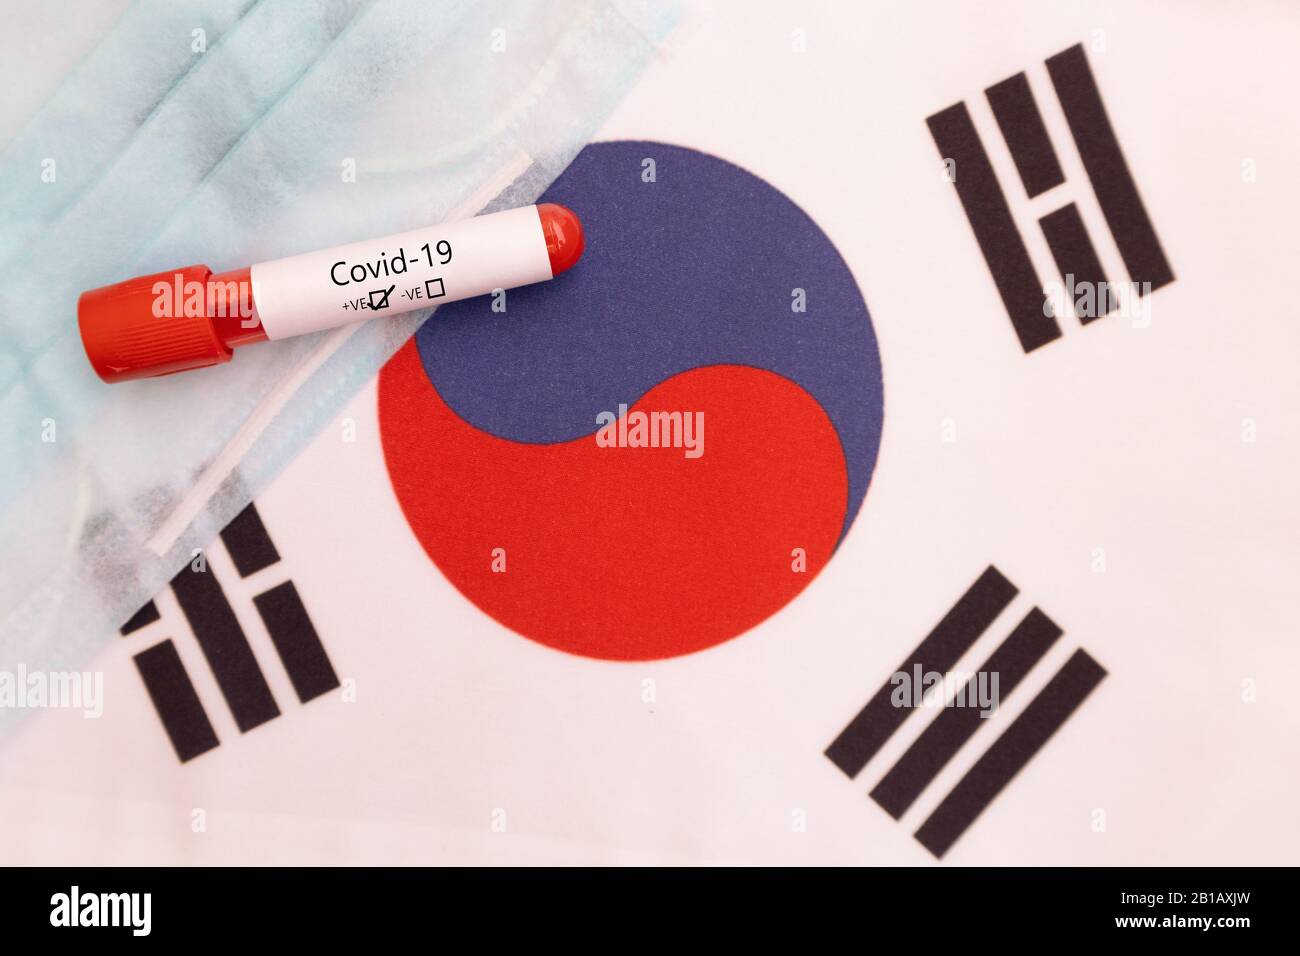 Concept of Novel Coronavirus spread from China to South Korea - 2019-nCoV or Covid-19 disease positive test on South korean flag showing with blood Stock Photo